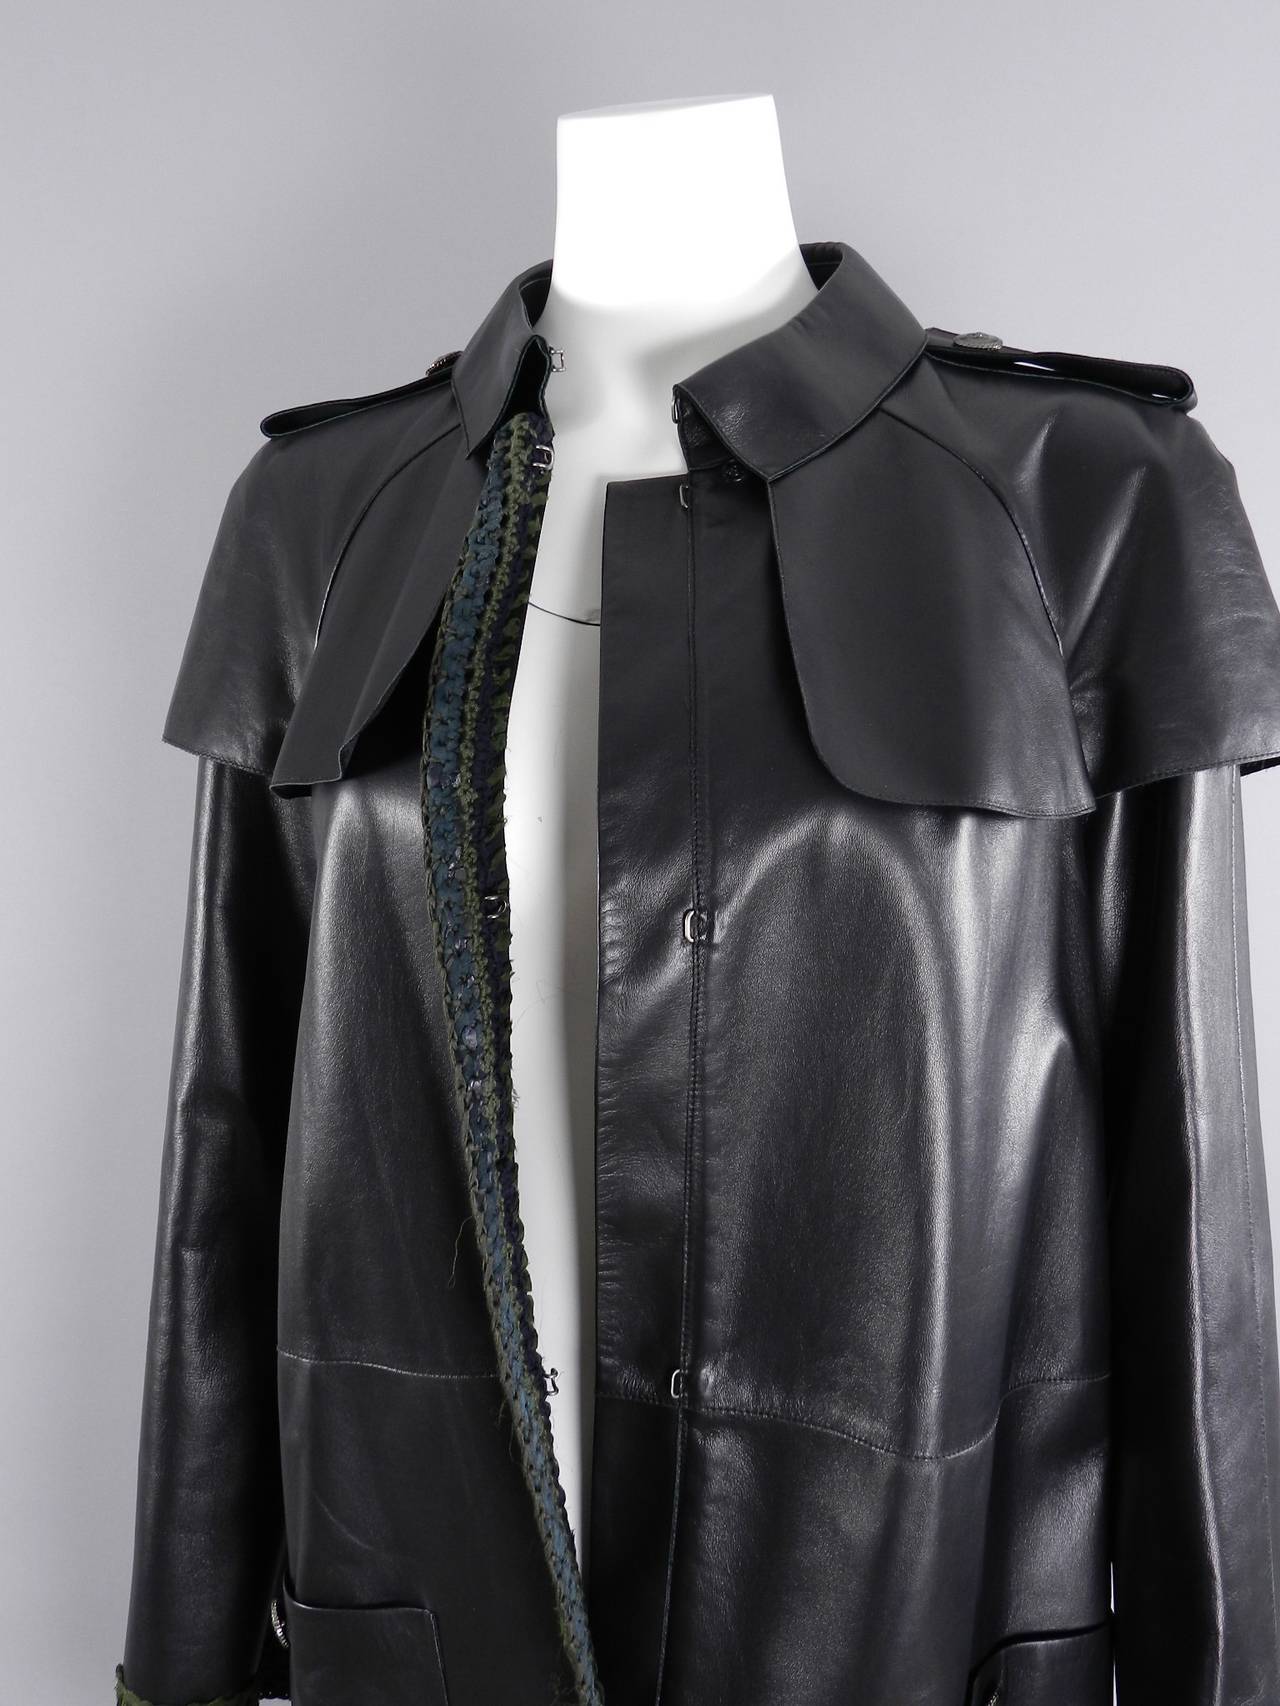 Women's Chanel 12P Leather Coat with Green Knit Trim